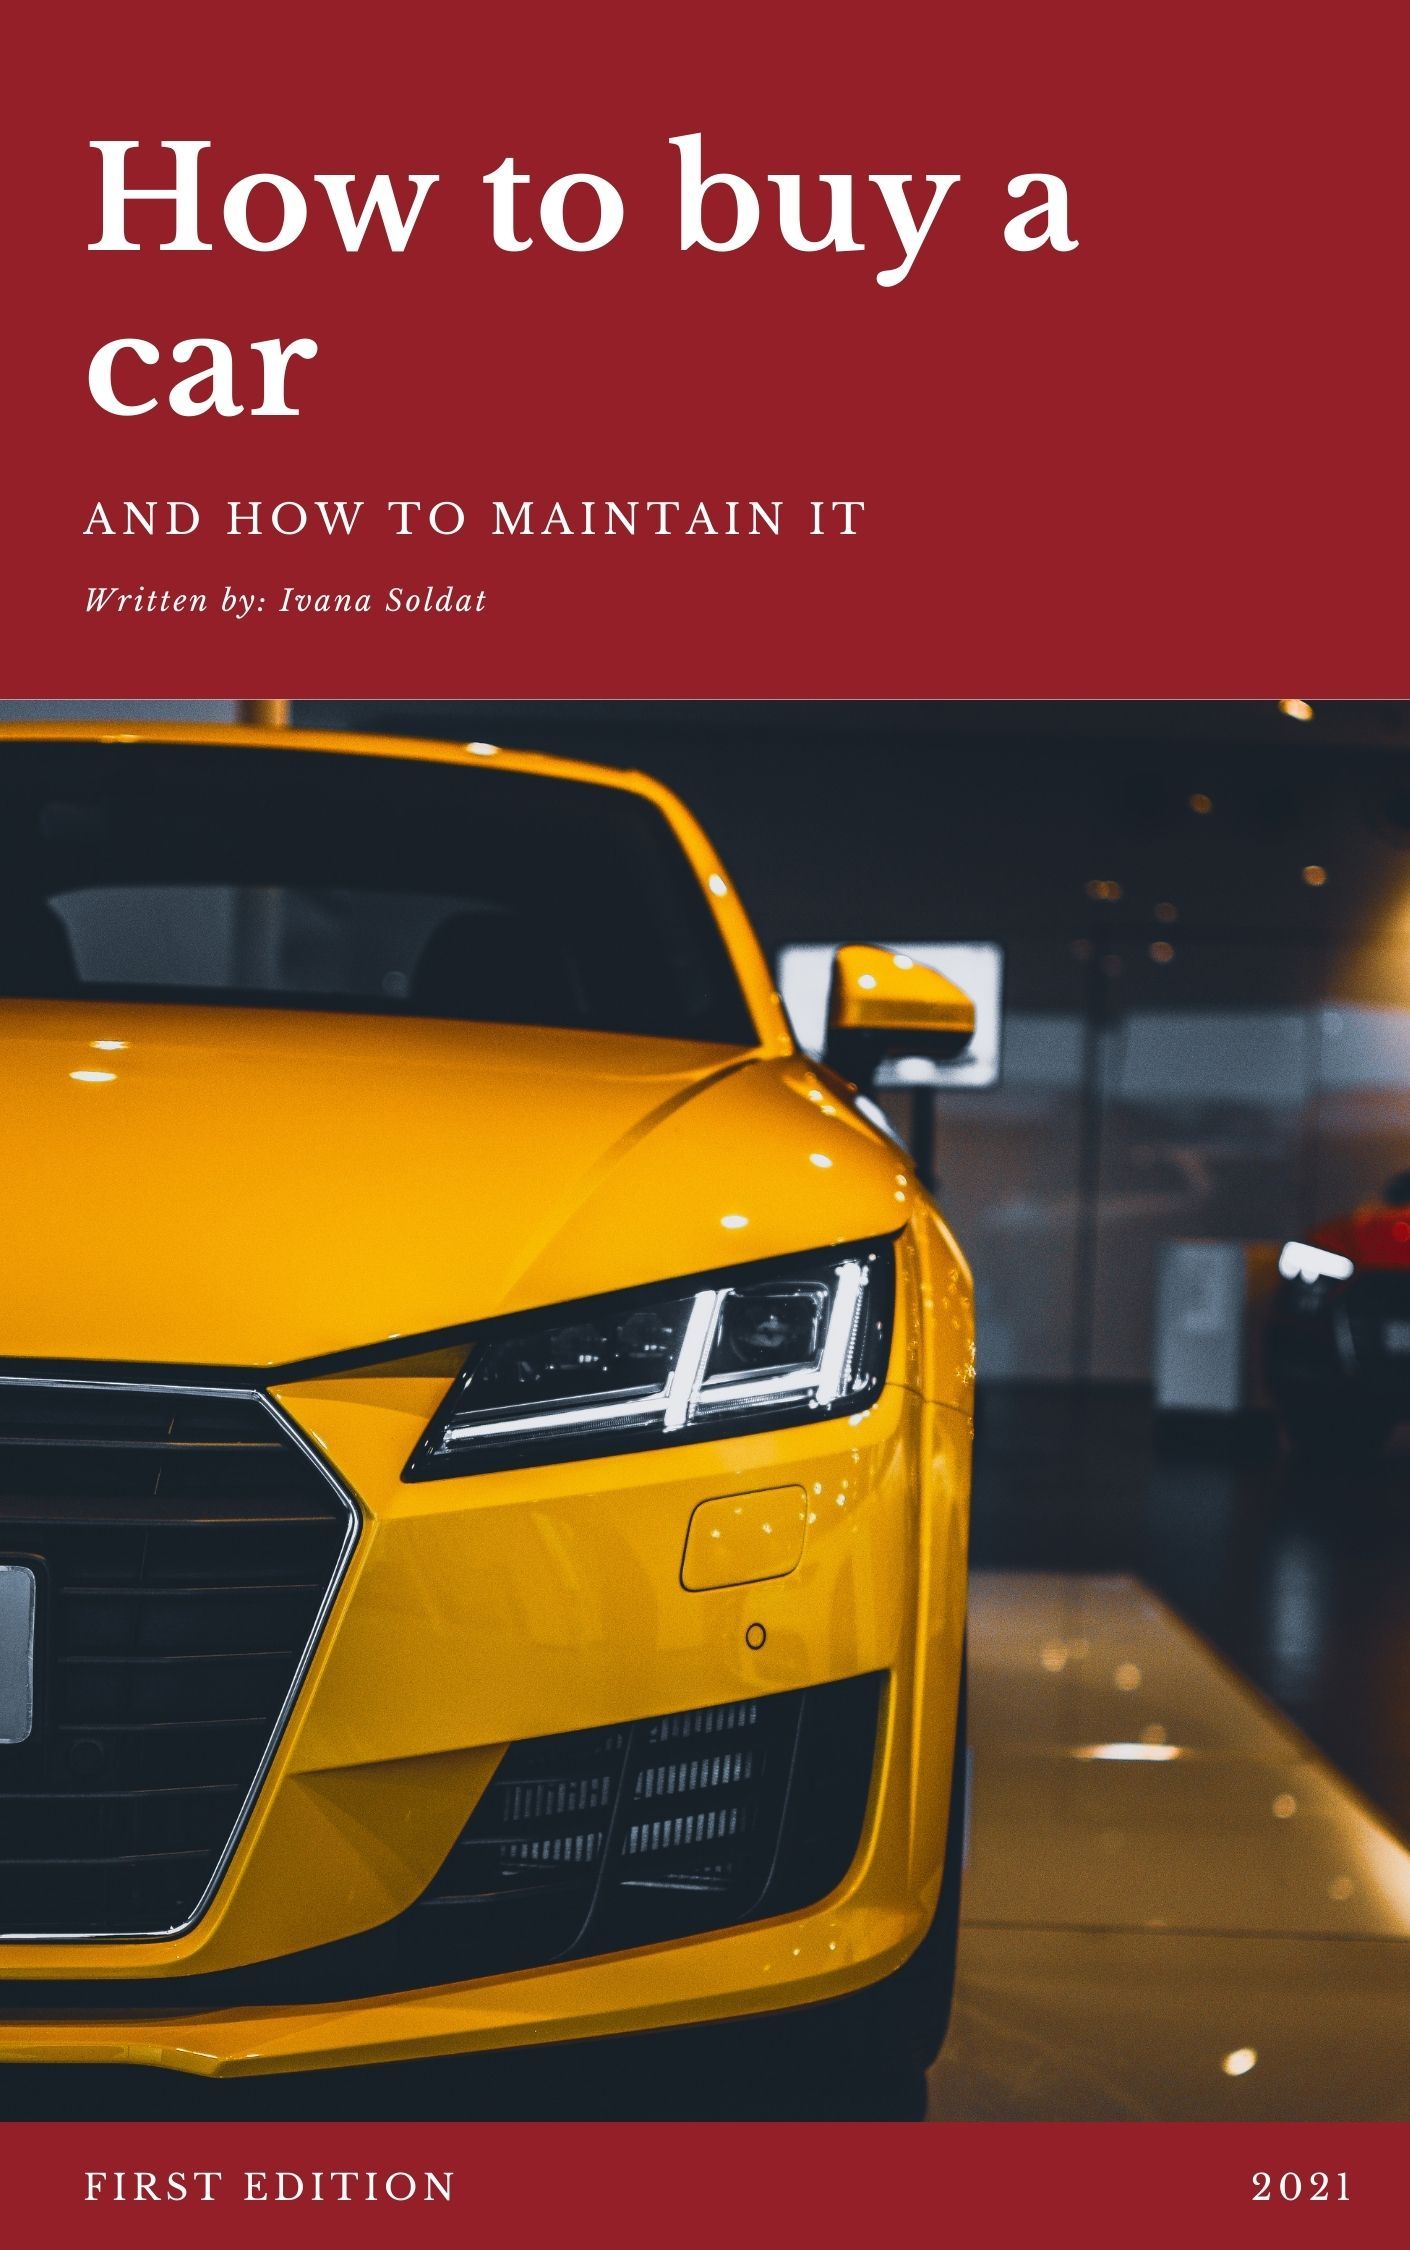 How to buy a car and how to maintain it's Book Image